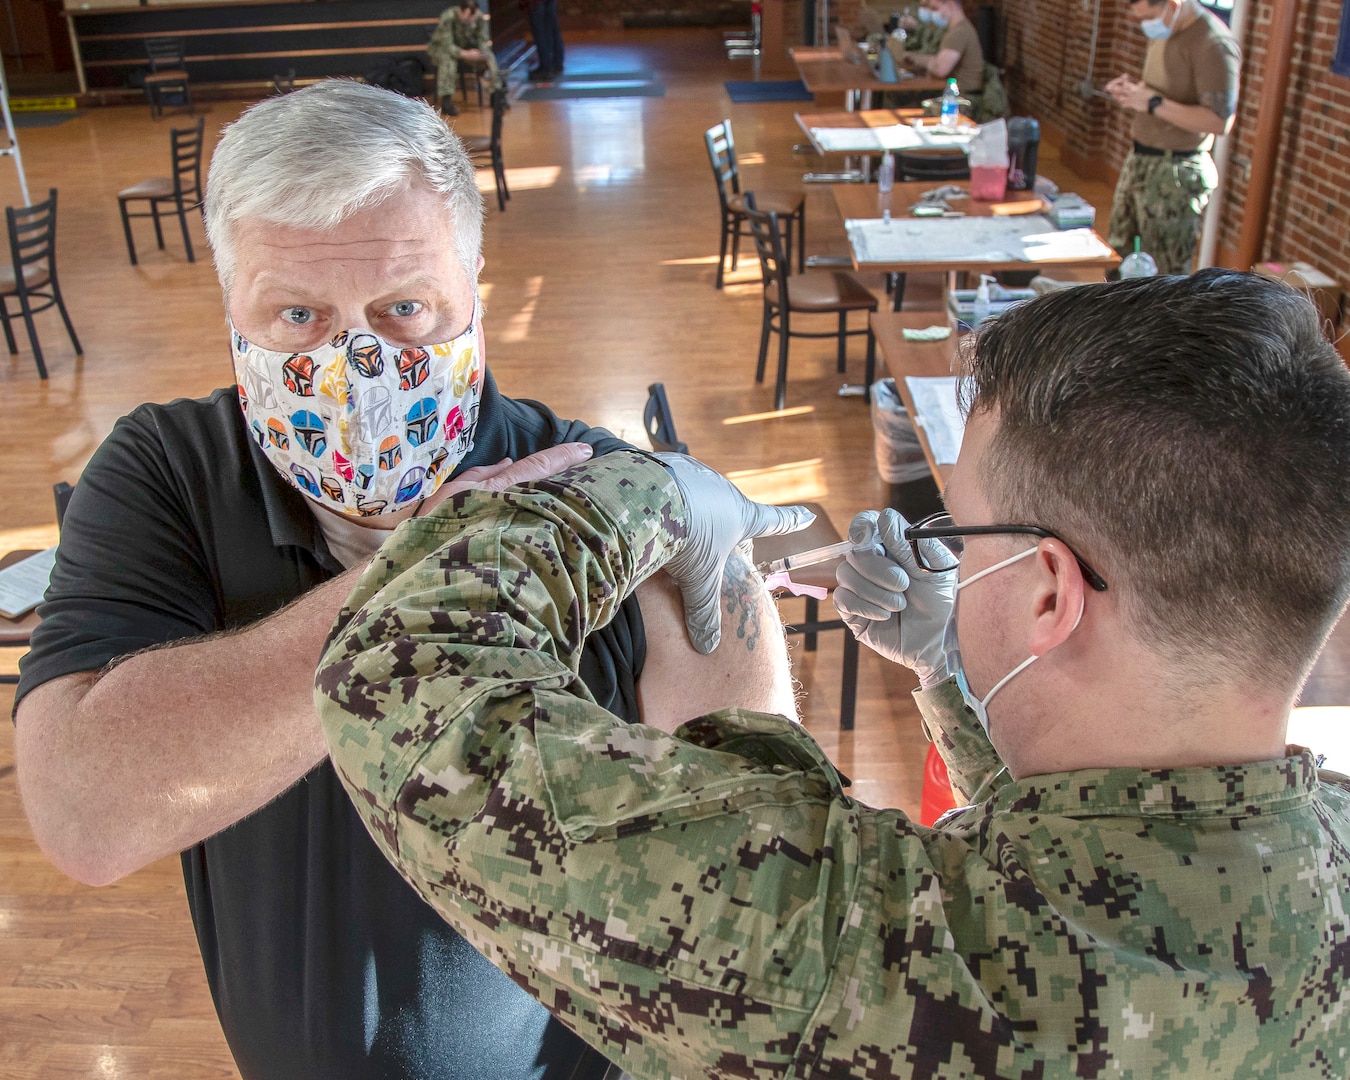 Dan Bell receives the first-of-two Moderna COVID-19 vaccine shots Feb. 10, 2021, in the former Samuel Adams Brewhouse on Naval Base Kitsap-Bremerton, in what is expected to be a phased employee vaccination process.